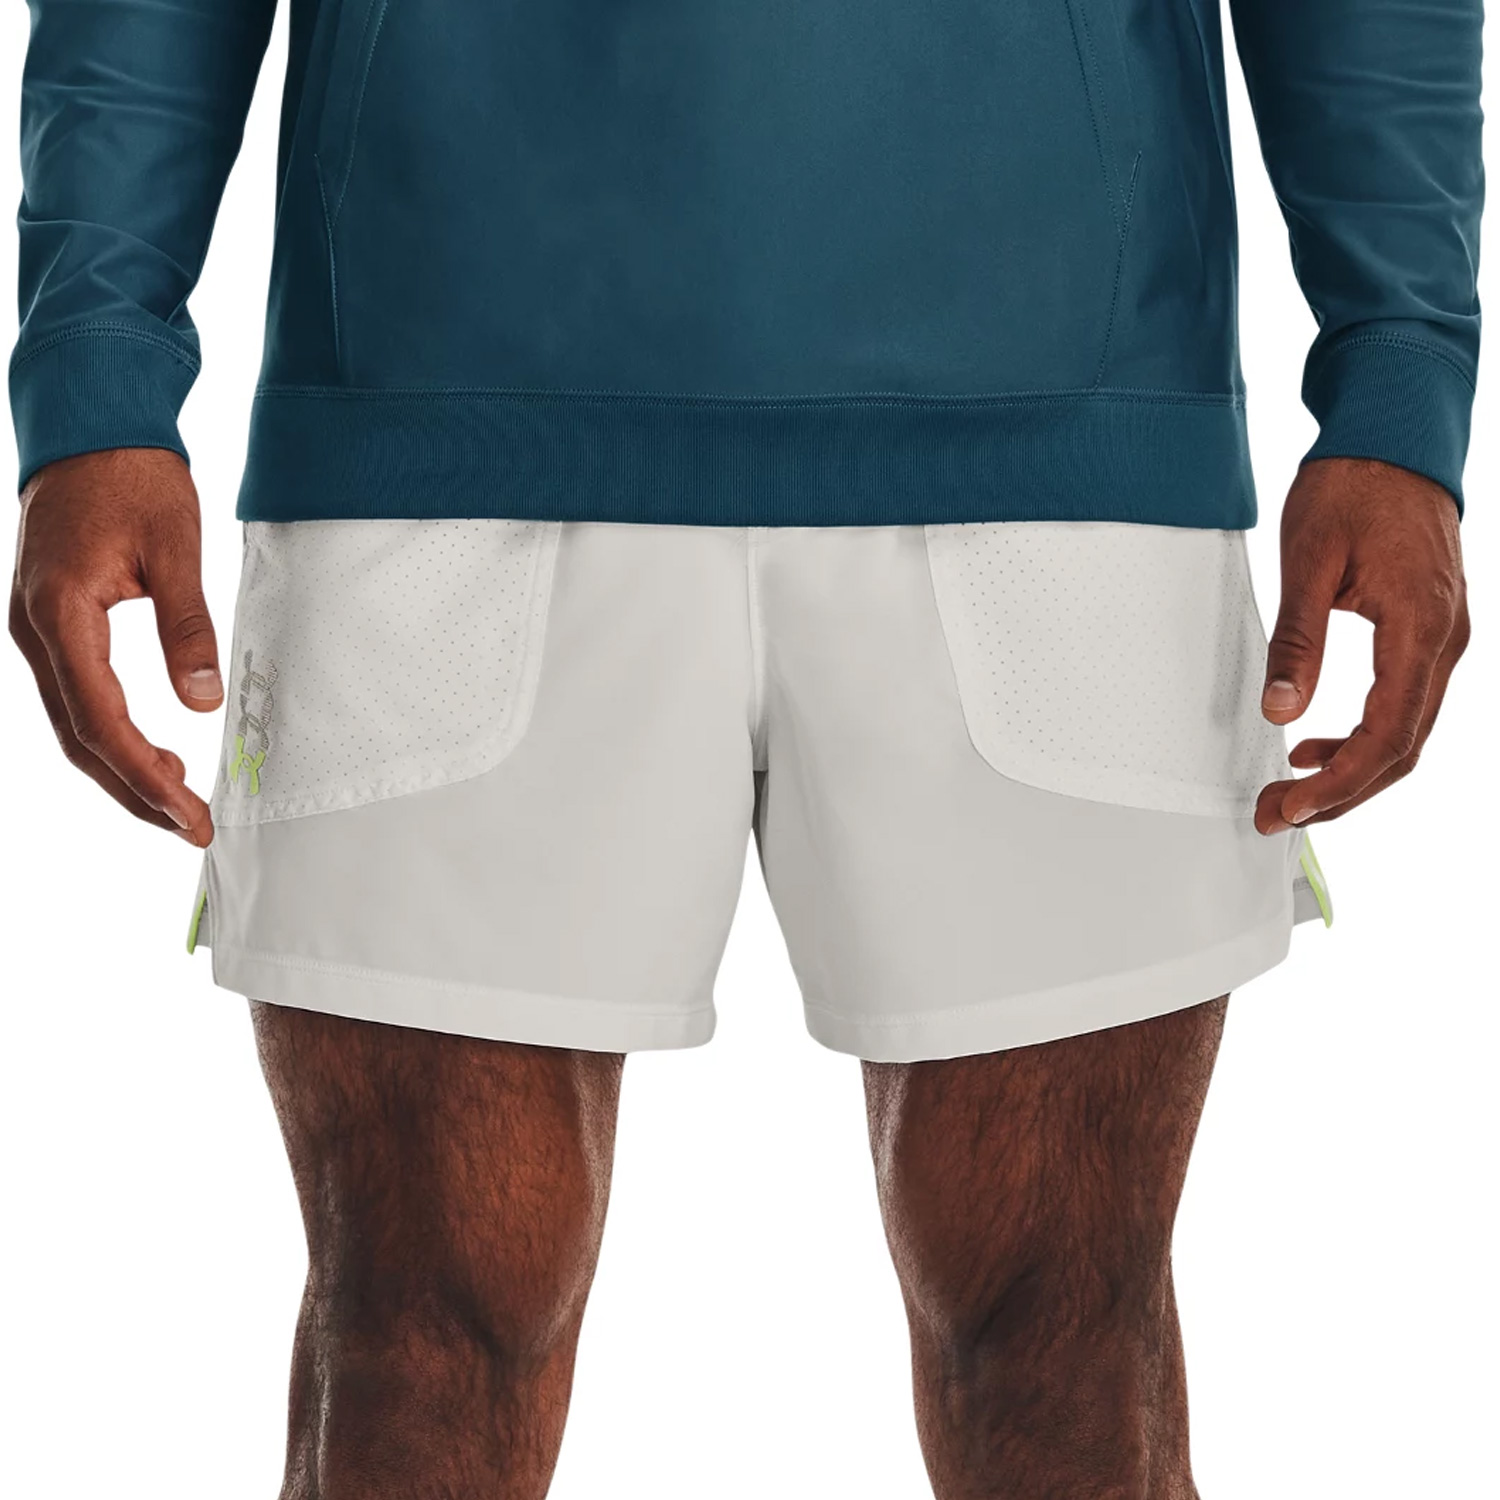 Under Armour Anywhere 5in Shorts - Gray Mist/Lime Surge